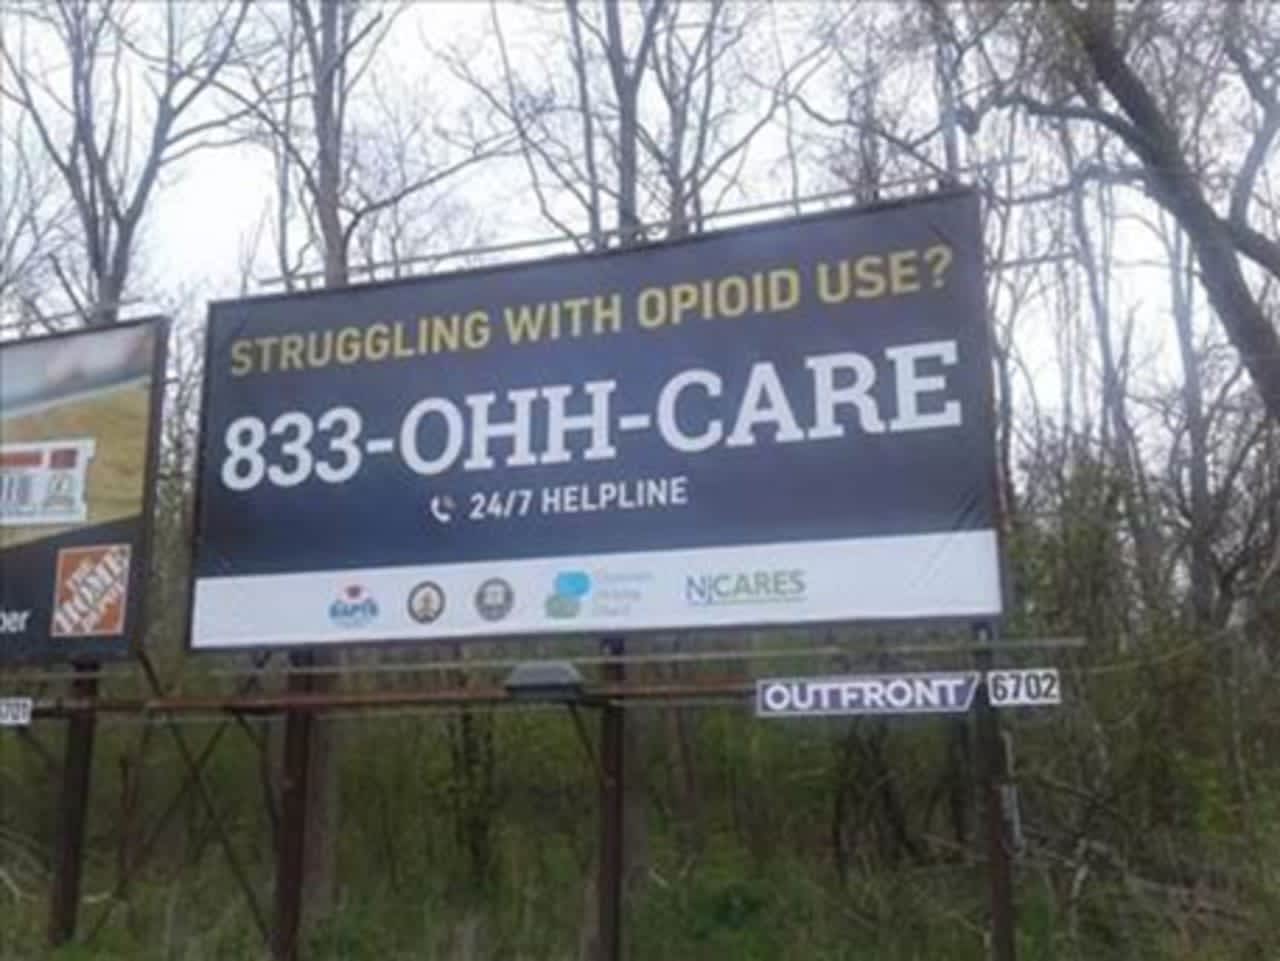 833-OHH-CARE, an 24/7 opioid use helpline, will be featured on billboards, buses and train stations all across the county. This one is along Route 9.